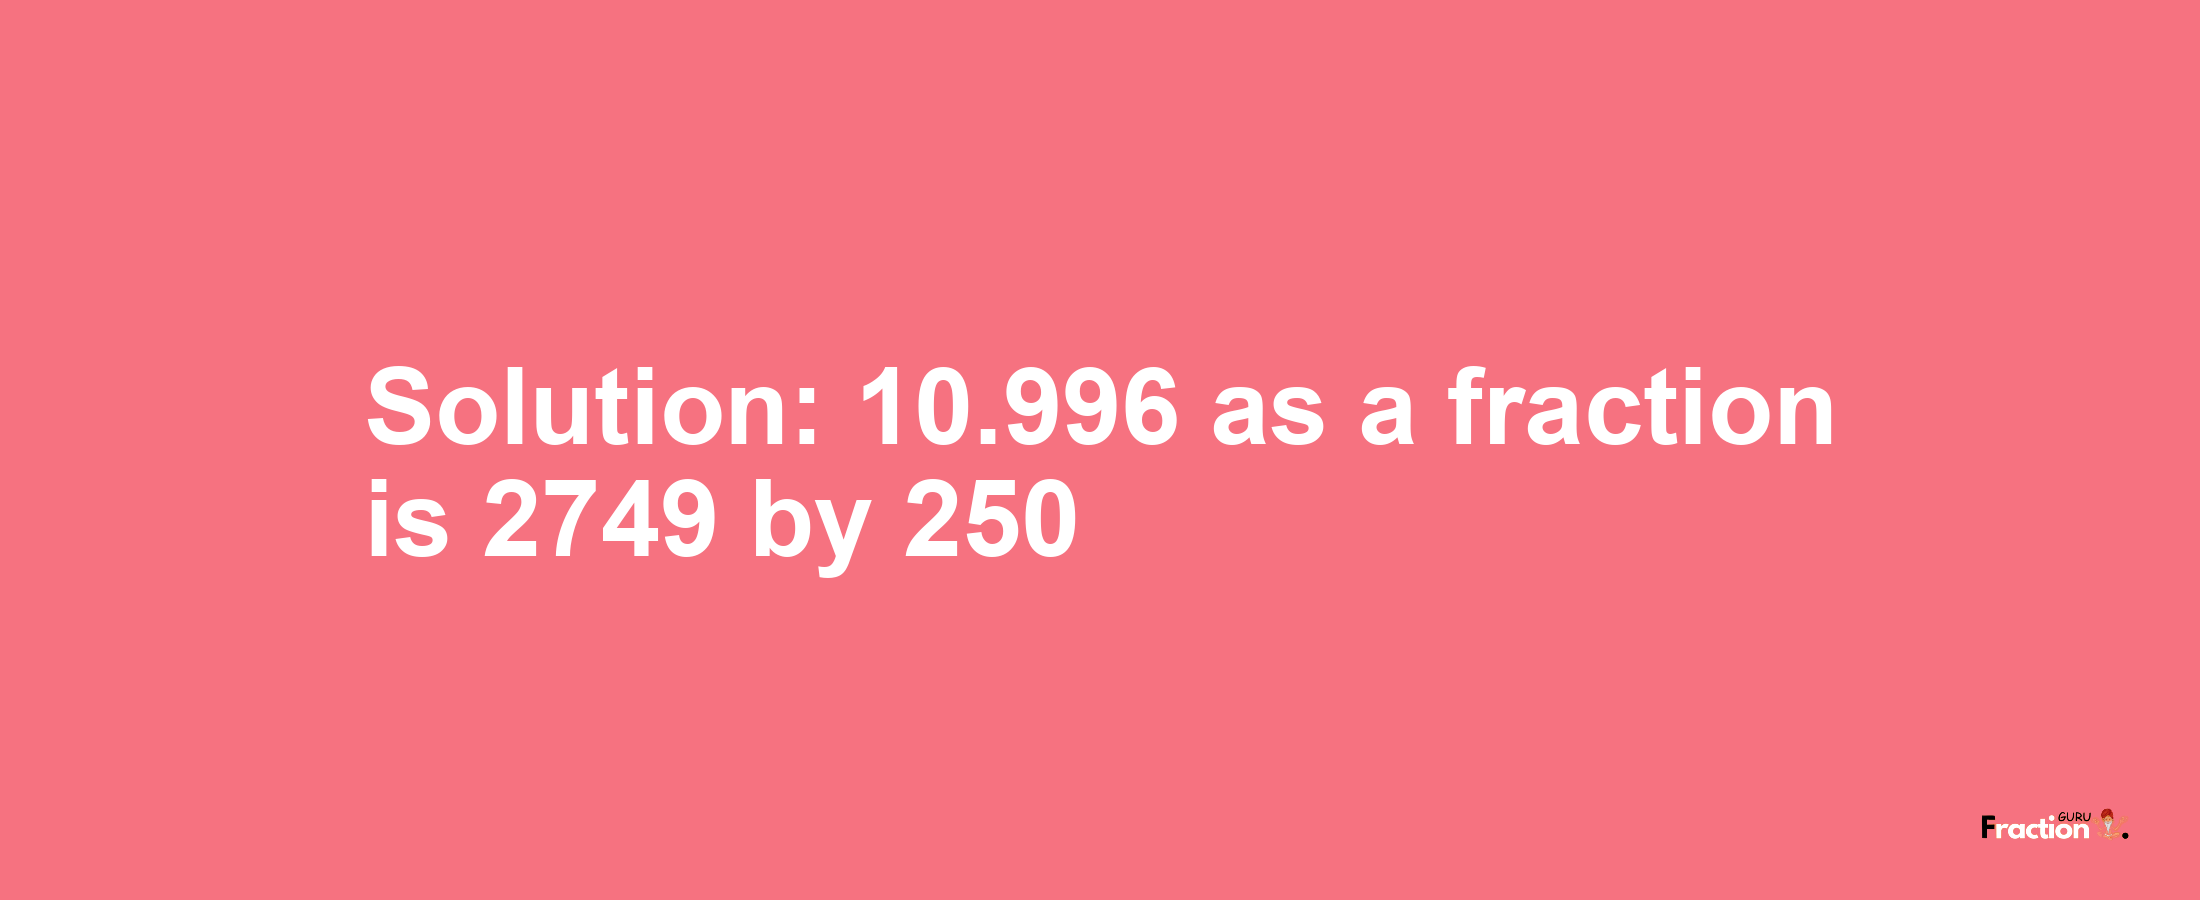 Solution:10.996 as a fraction is 2749/250